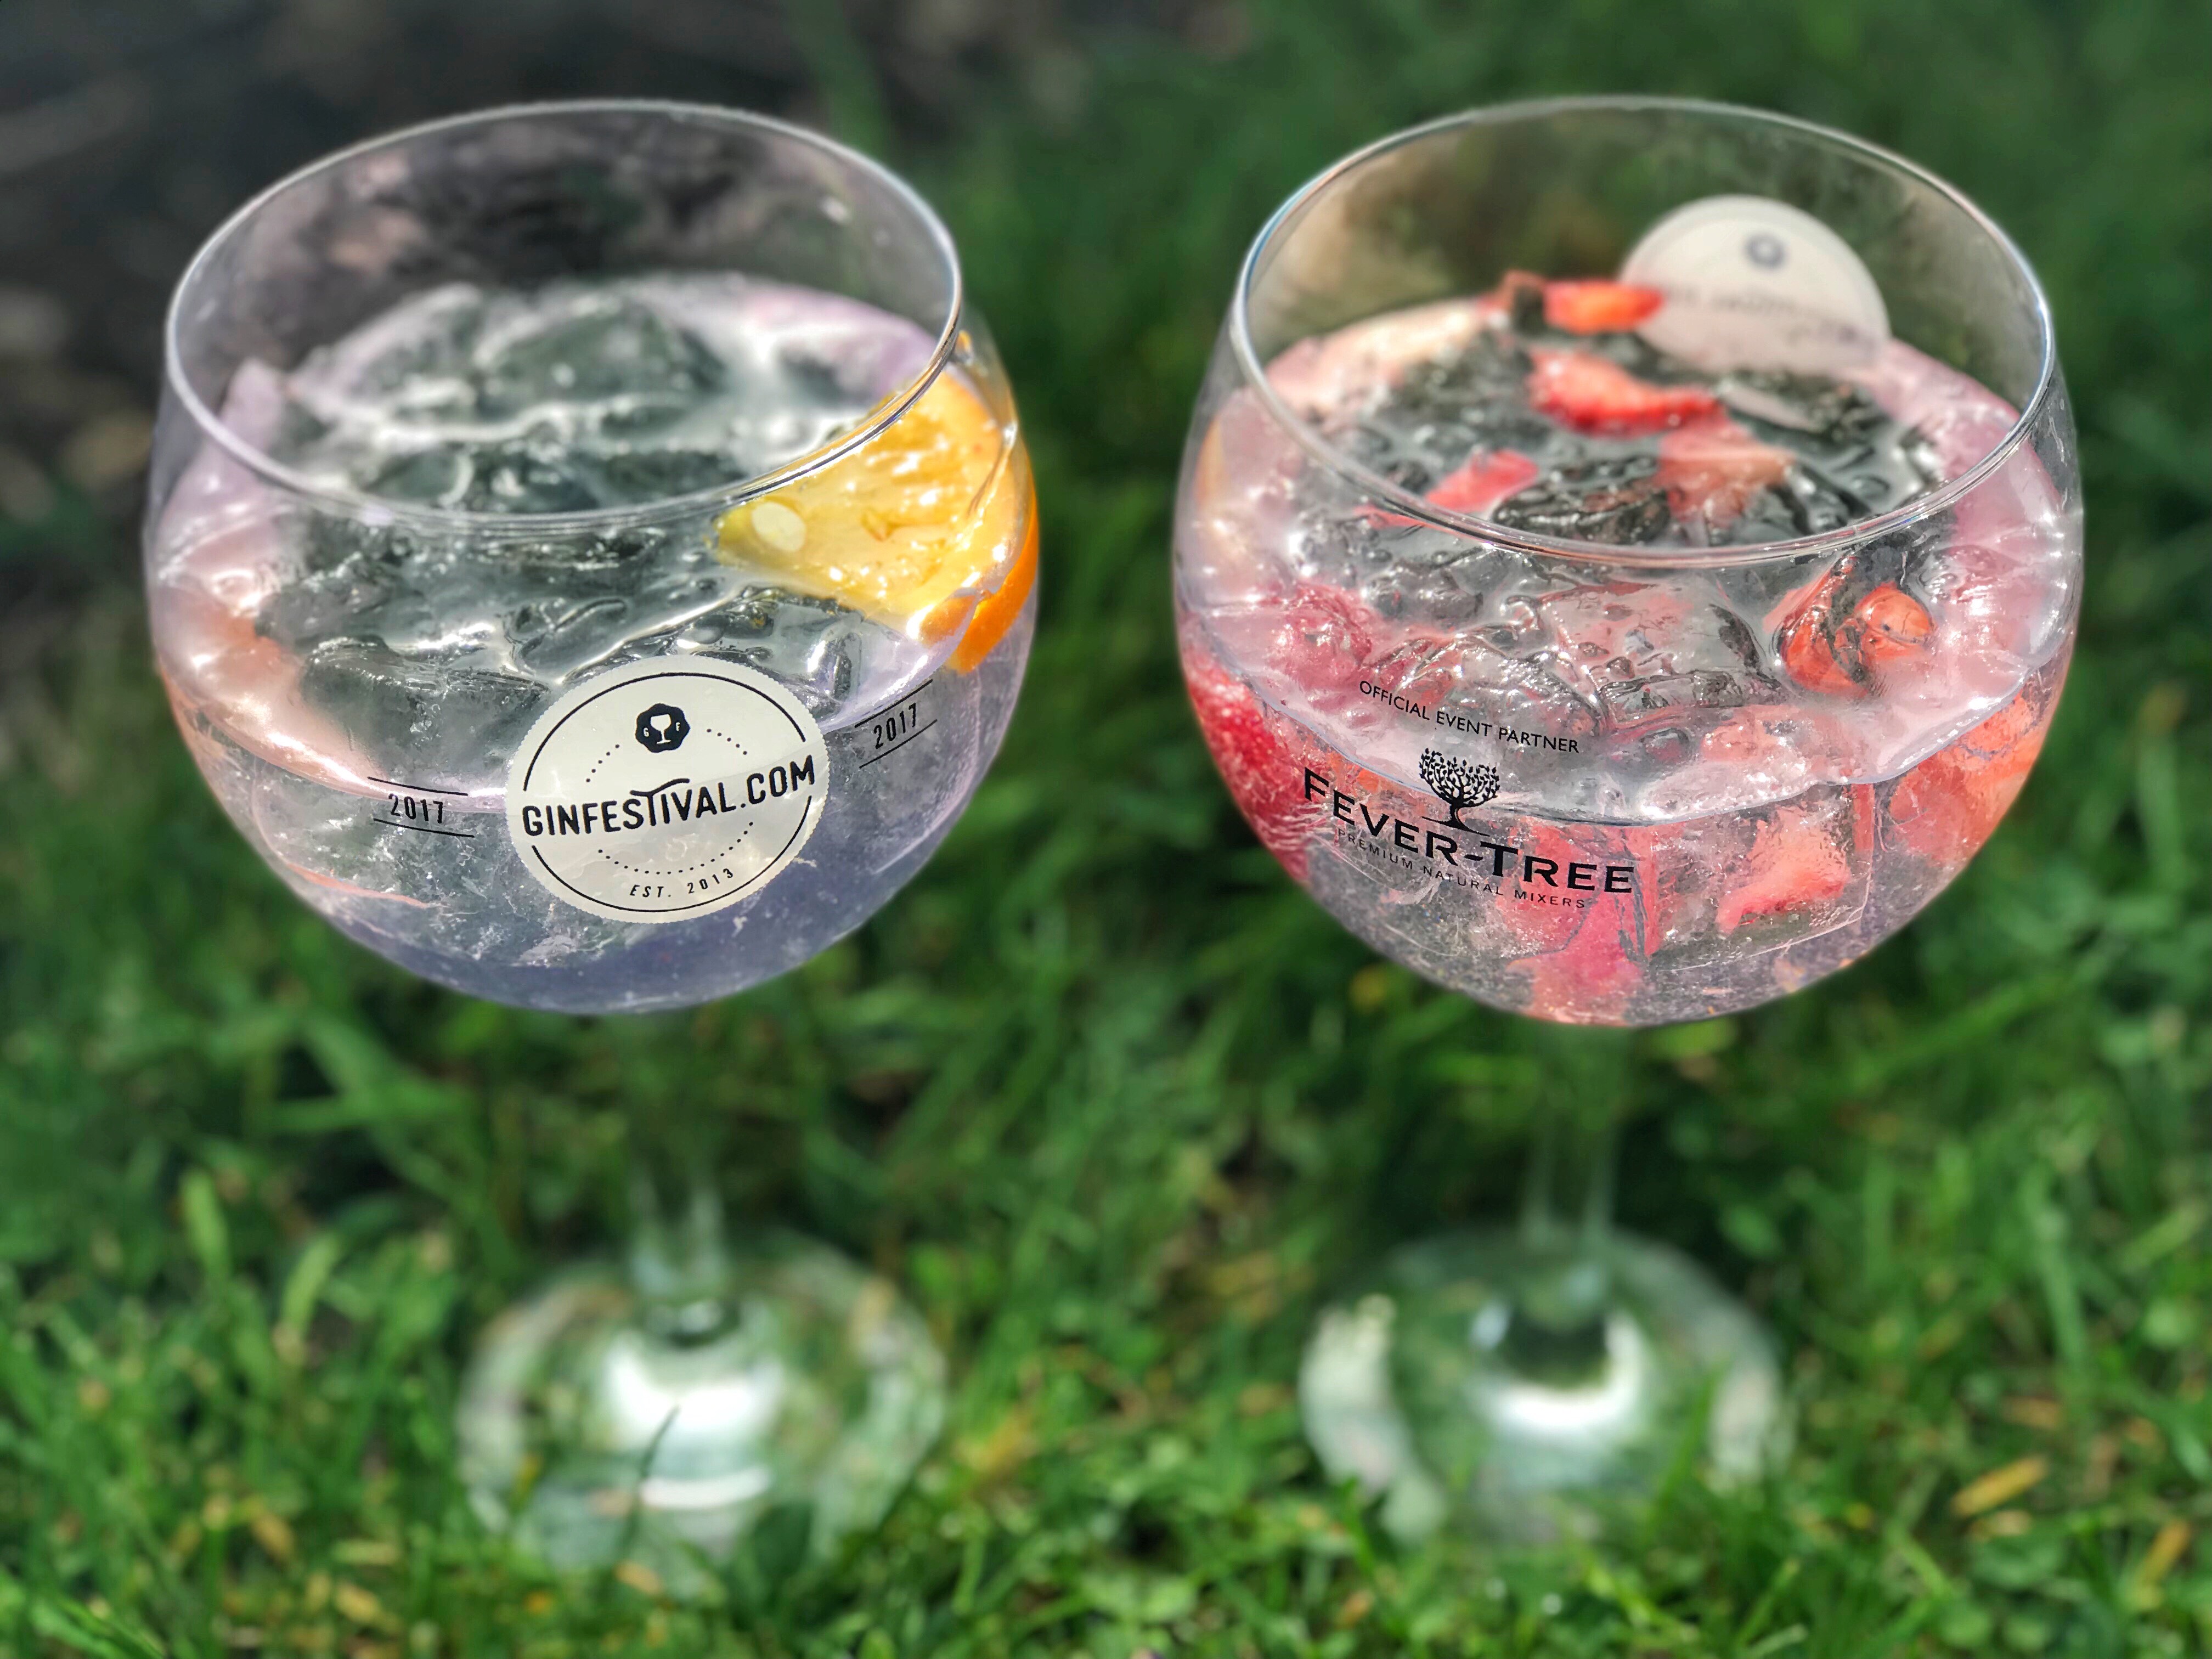 Gin Festival Review - Enjoy the Adventure